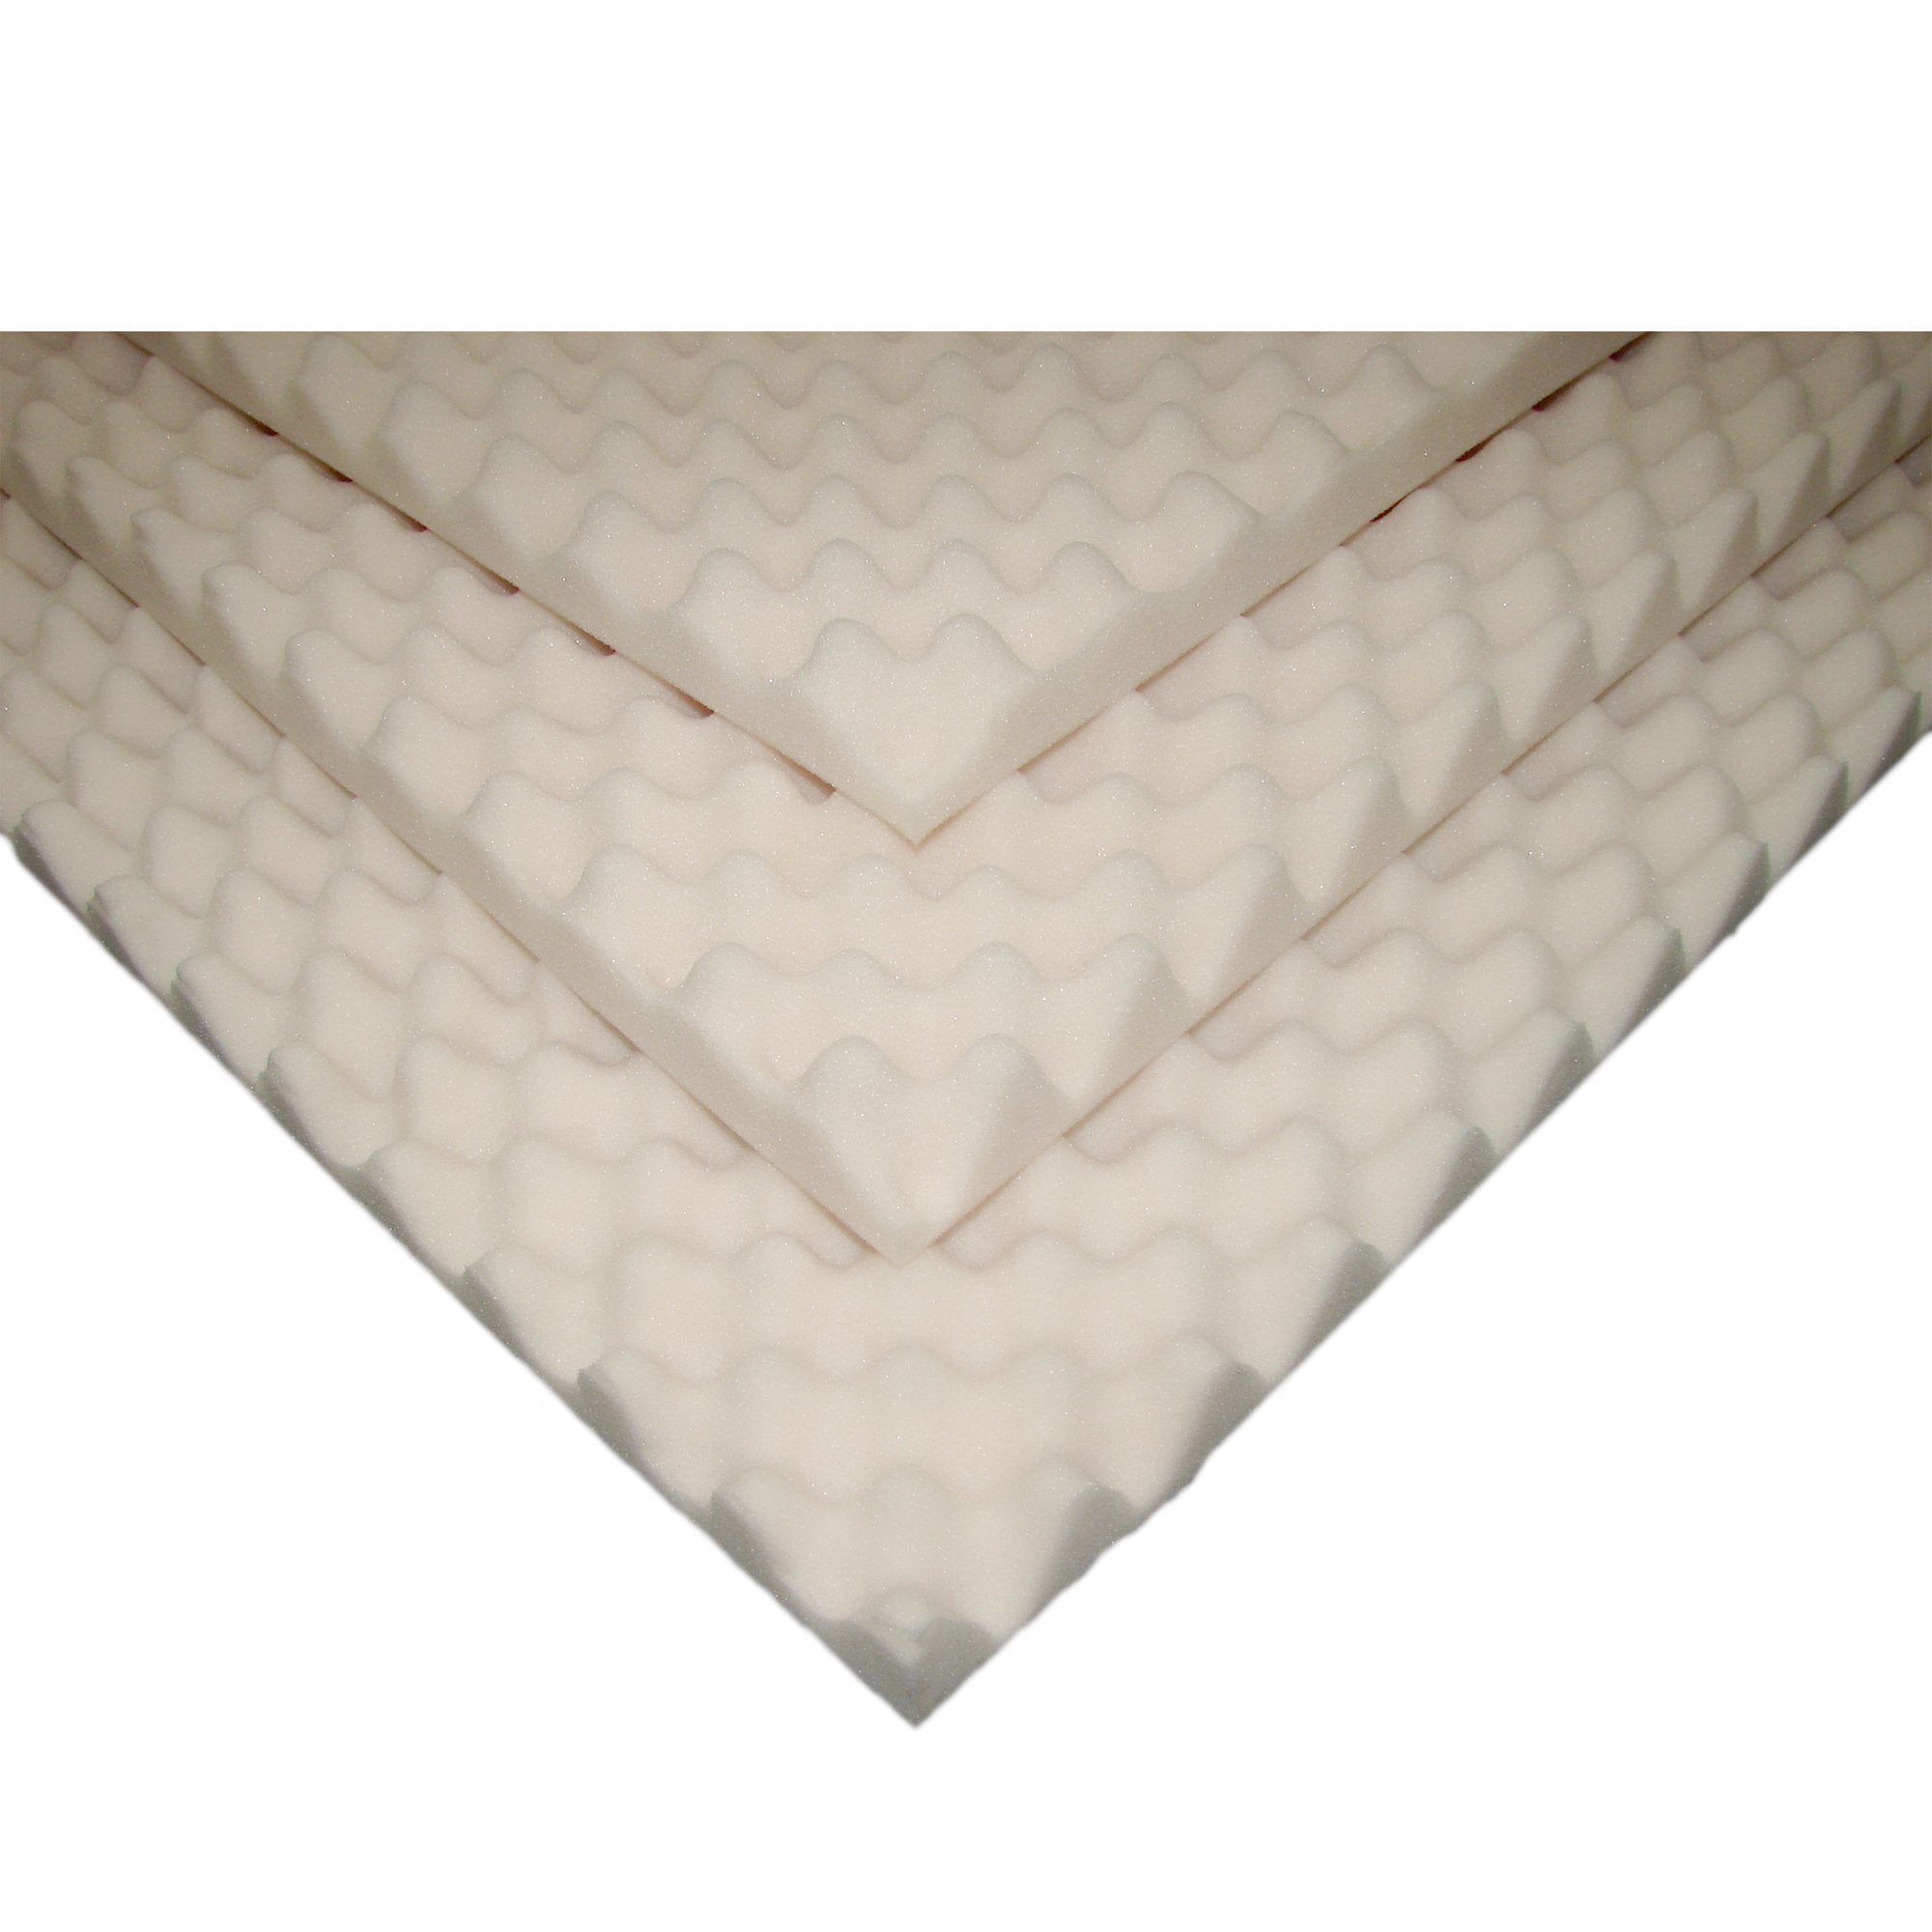 Mattress Overlay Pressure Redistribution Type 72 D X 34 W X 4 H Inch For Bed Mattresses